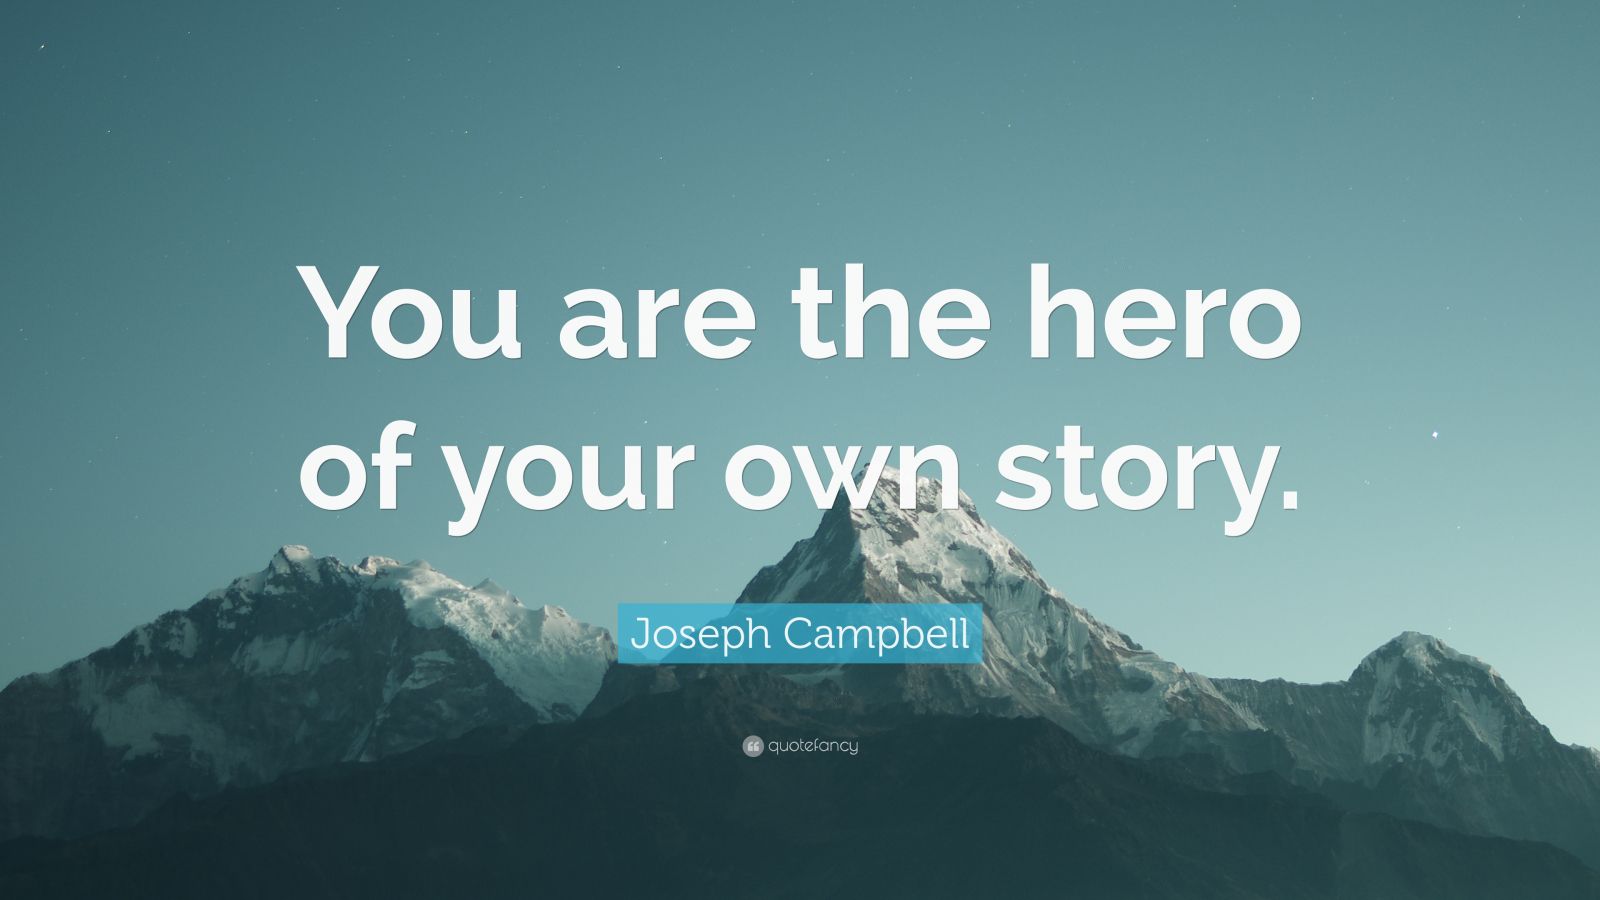 2003928 Joseph Campbell Quote You are the hero of your own story